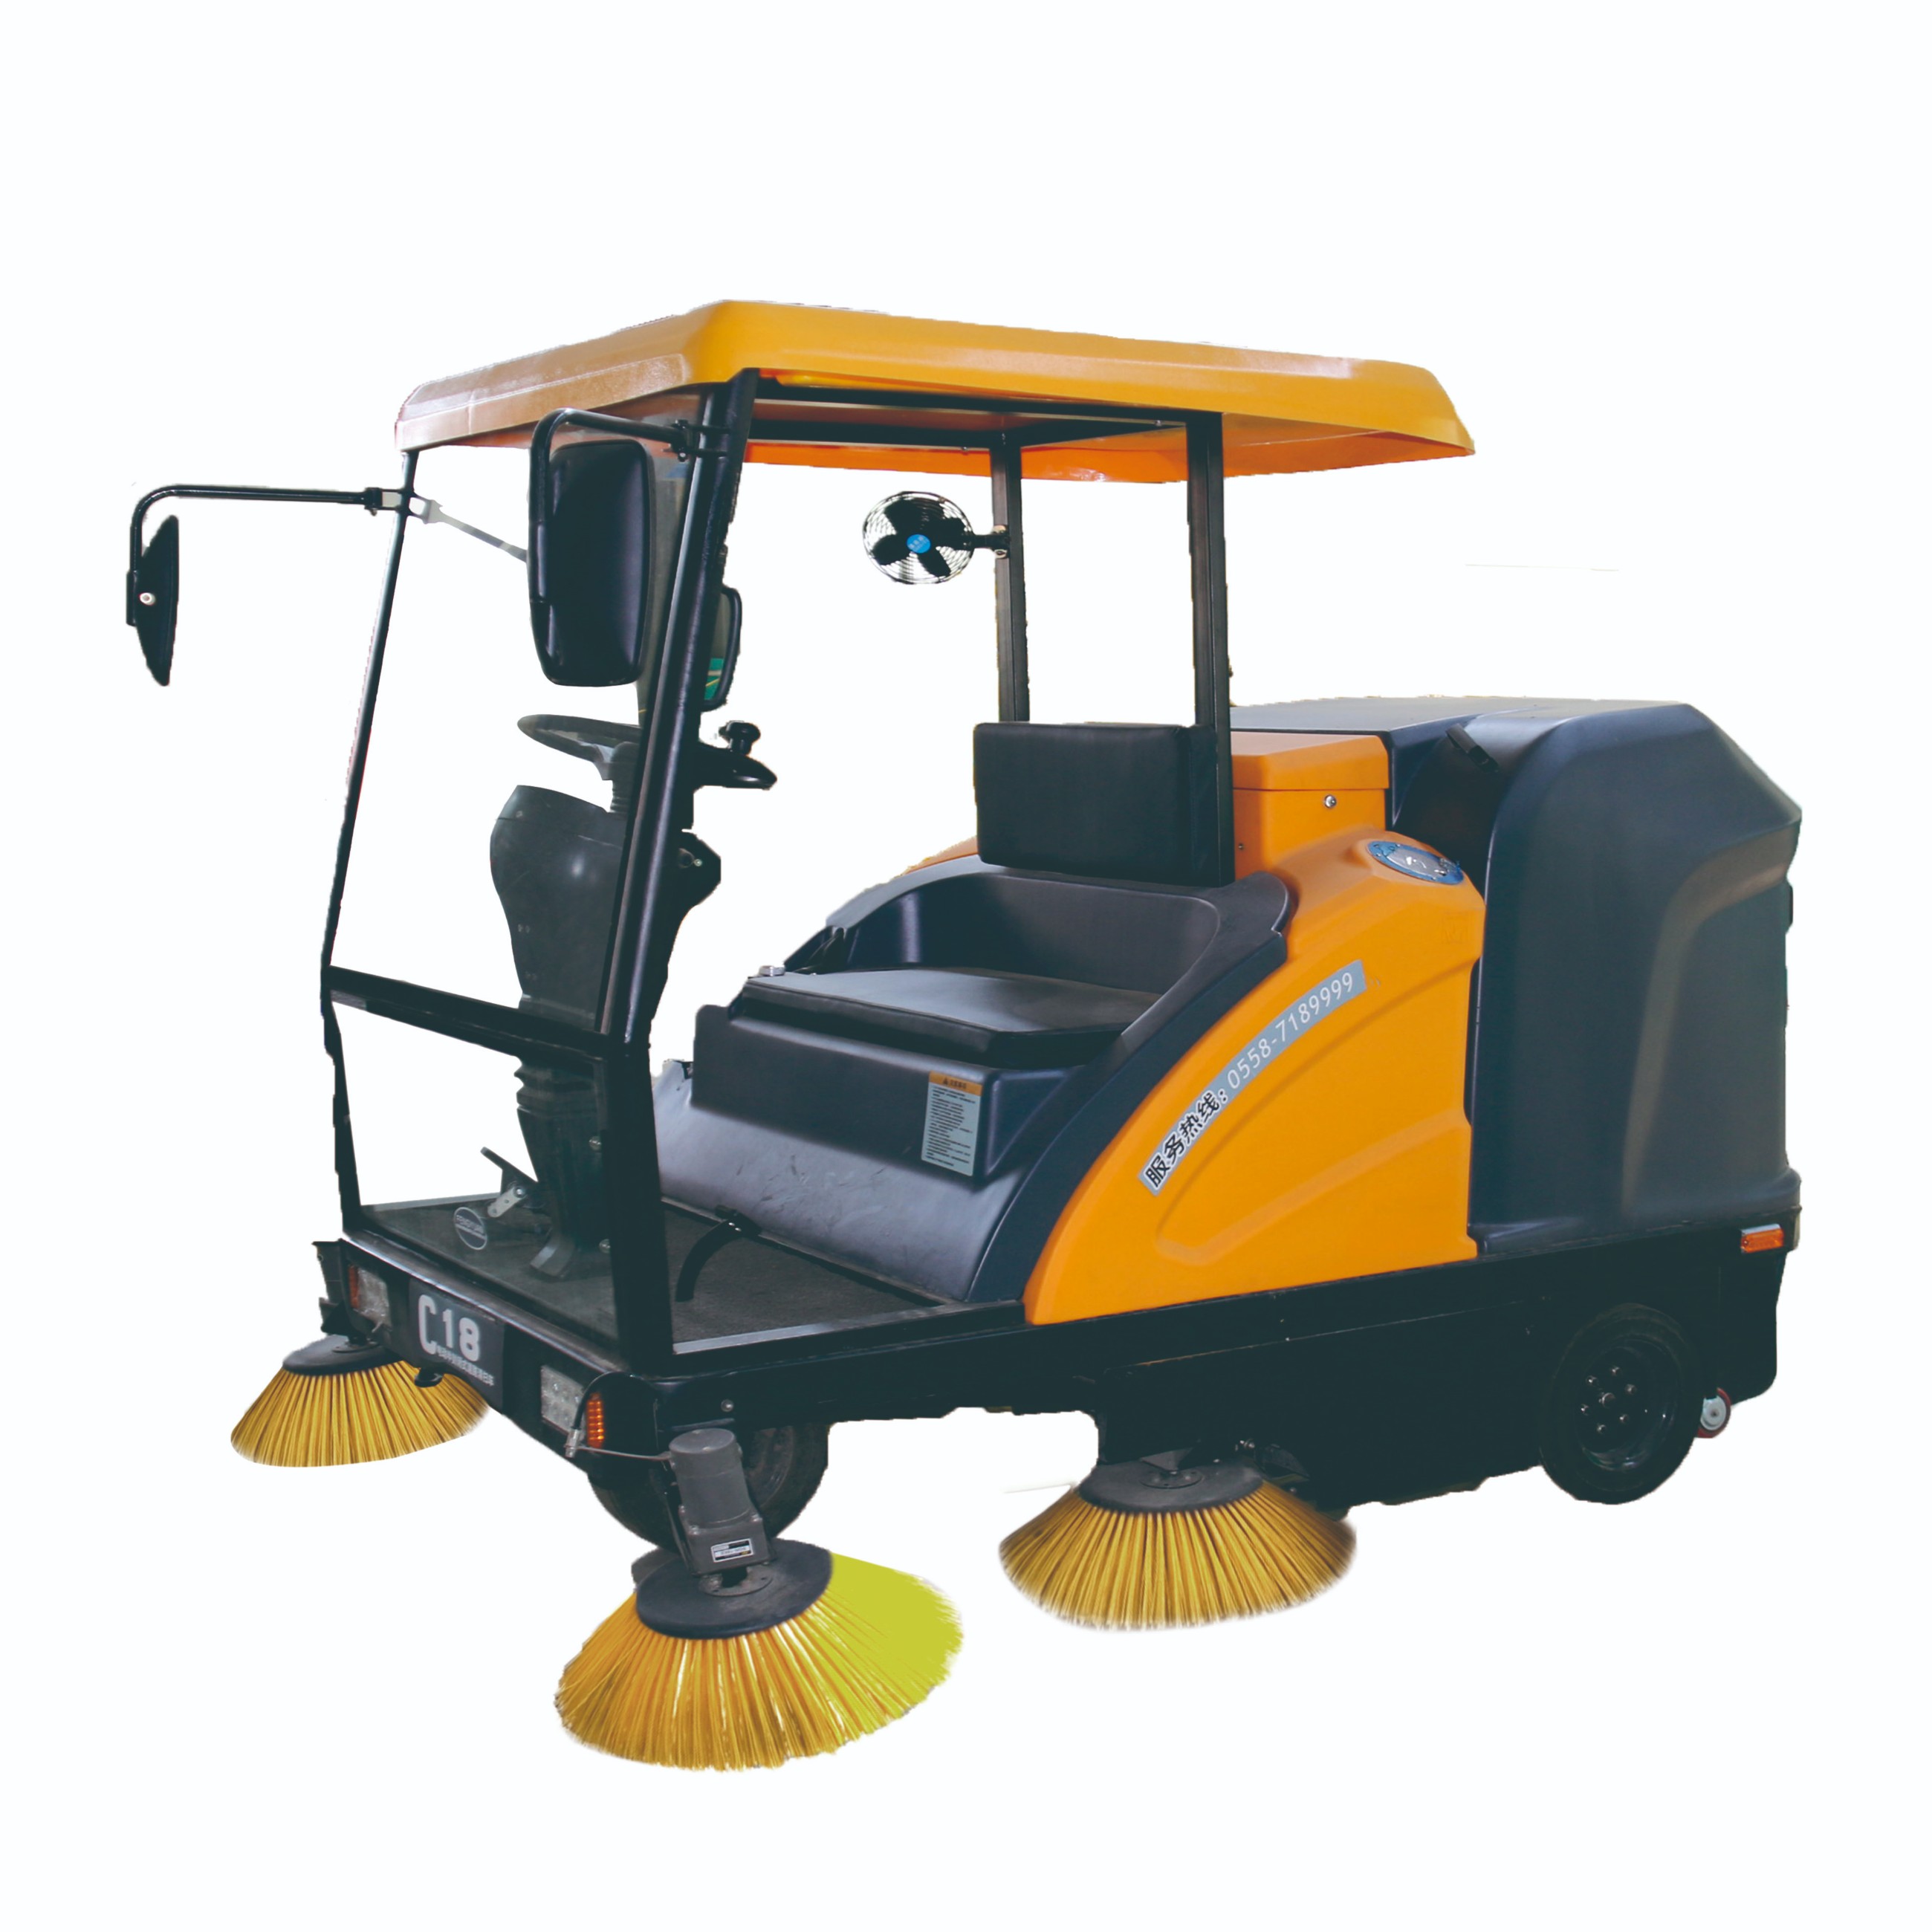 Electric sweeper C18